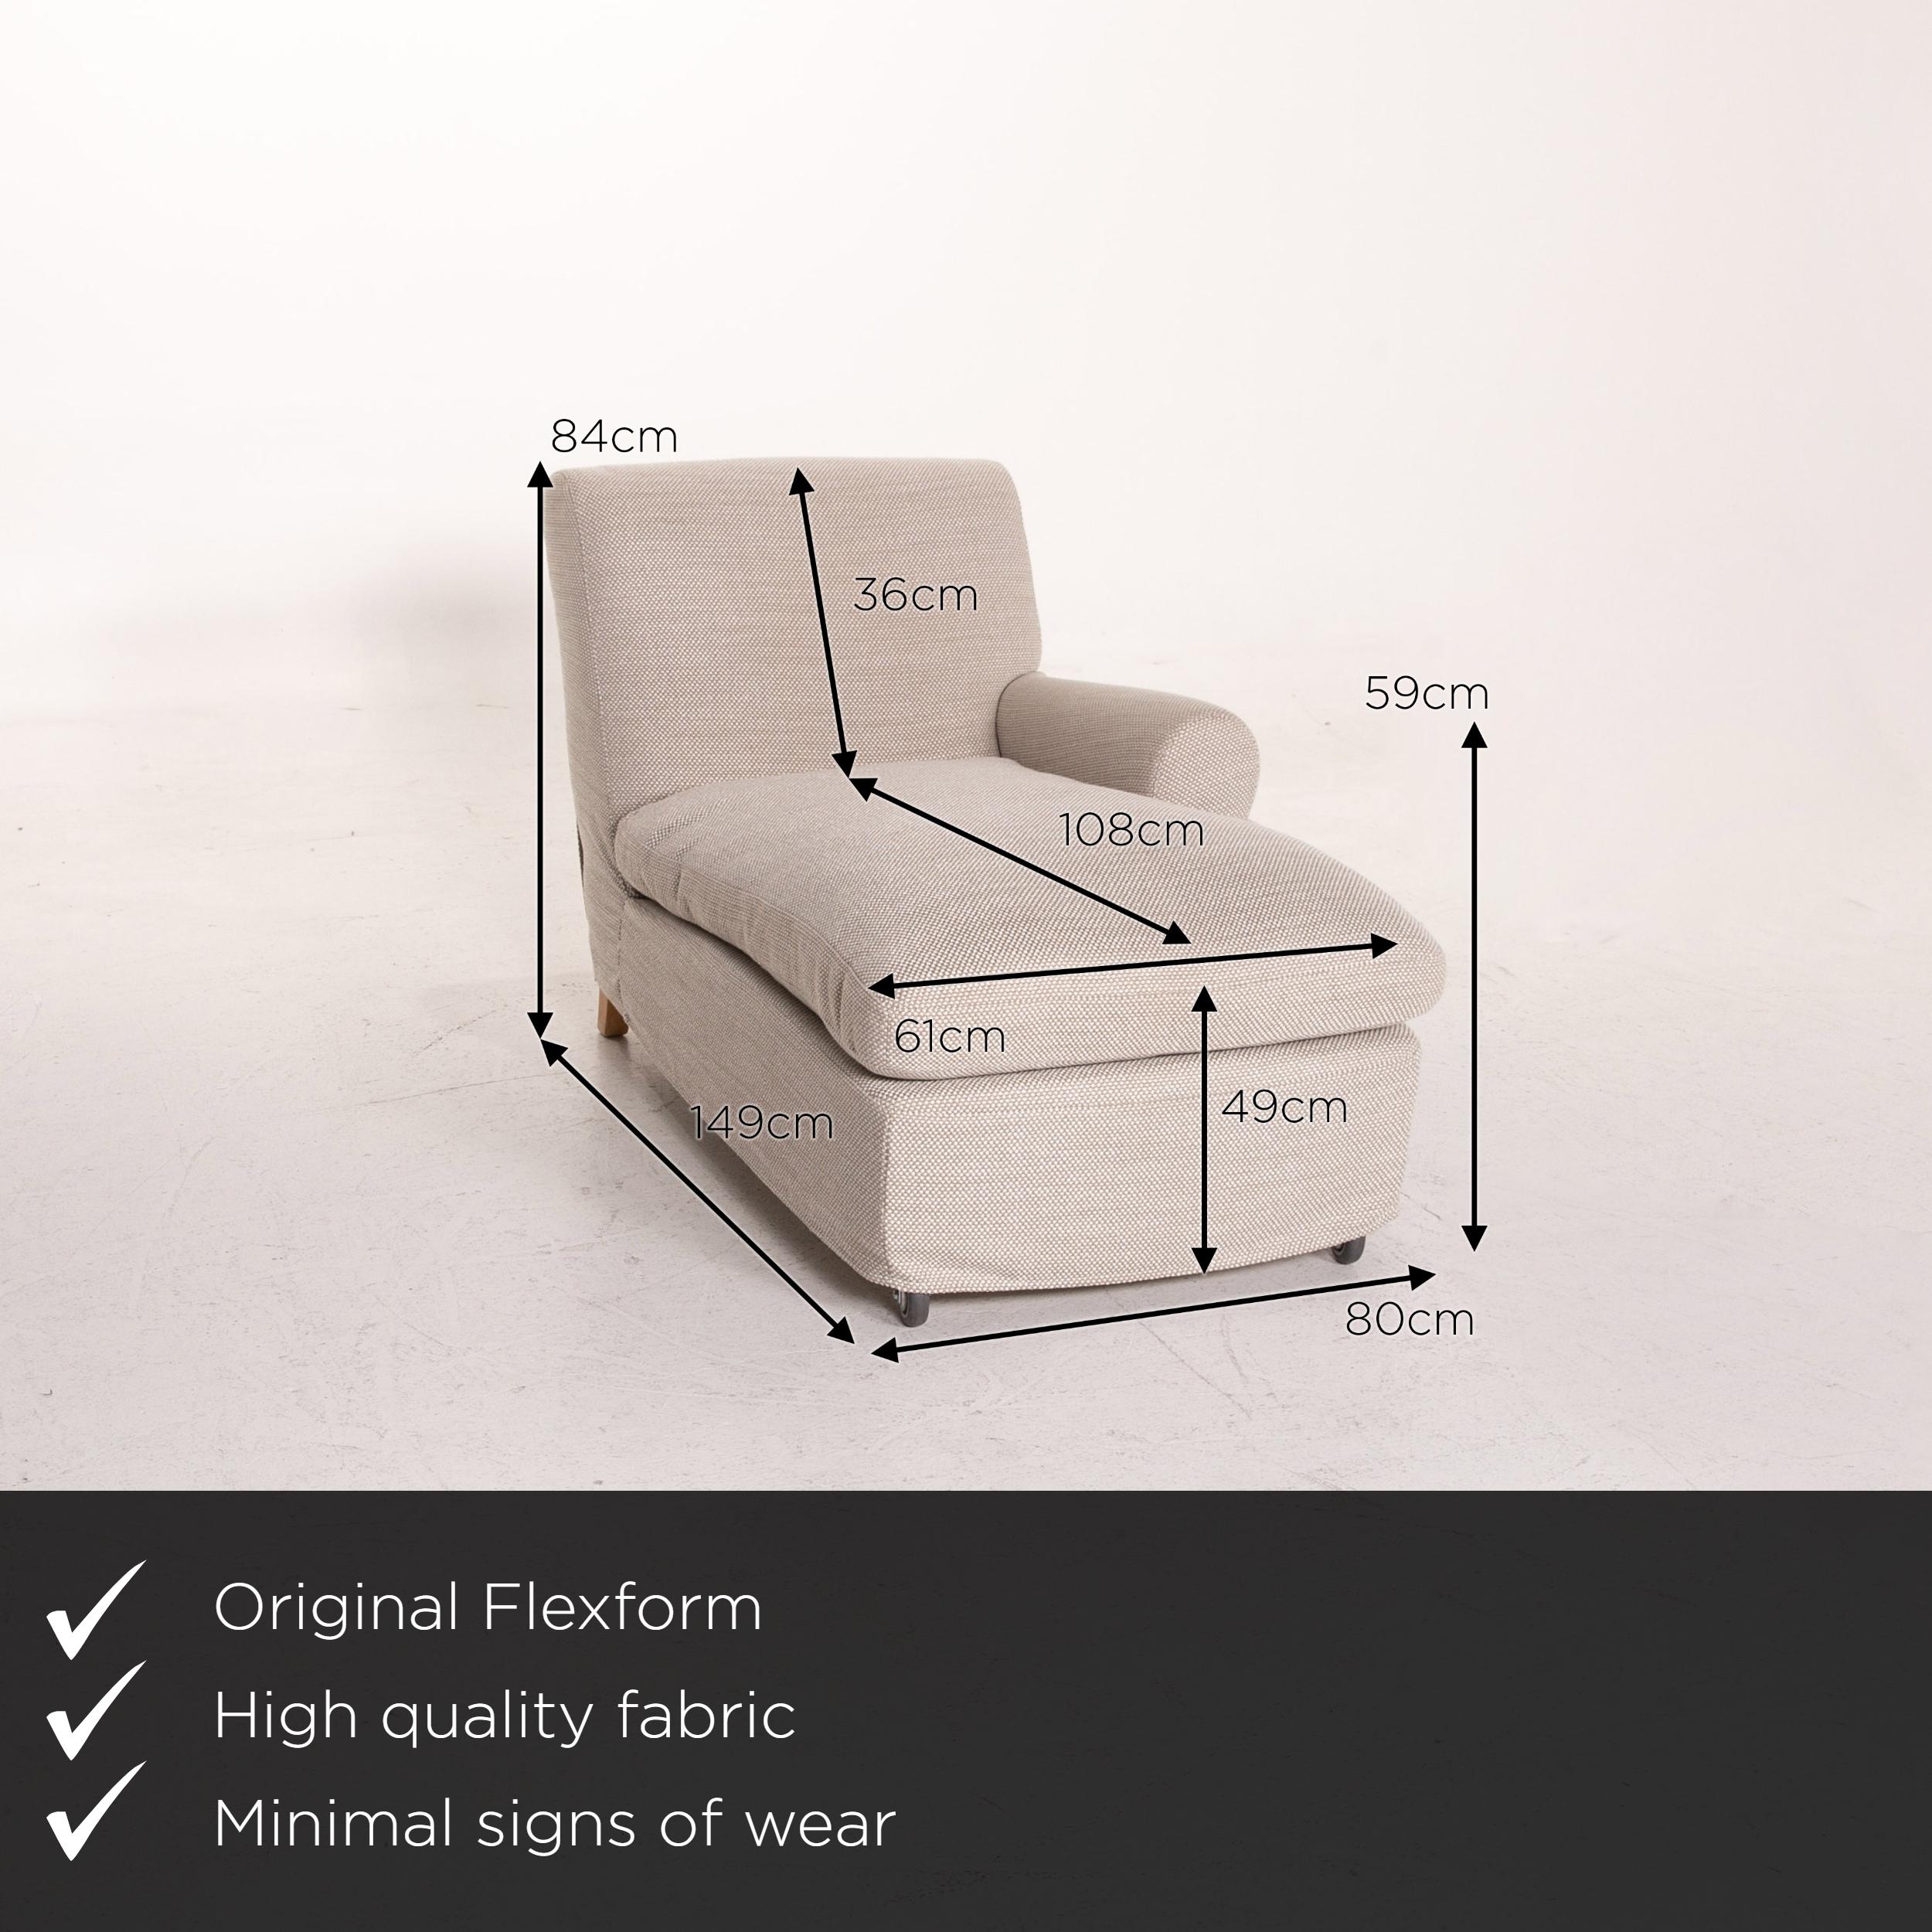 We present to you a Flexform Nonnamaria fabric lounger beige gray-beige chaise longue Dormeuse.

 

 Product measurements in centimetres:
 

 depth: 149
 width: 80
 height: 84
 seat height: 49
 rest height: 59
 seat depth: 108
 seat